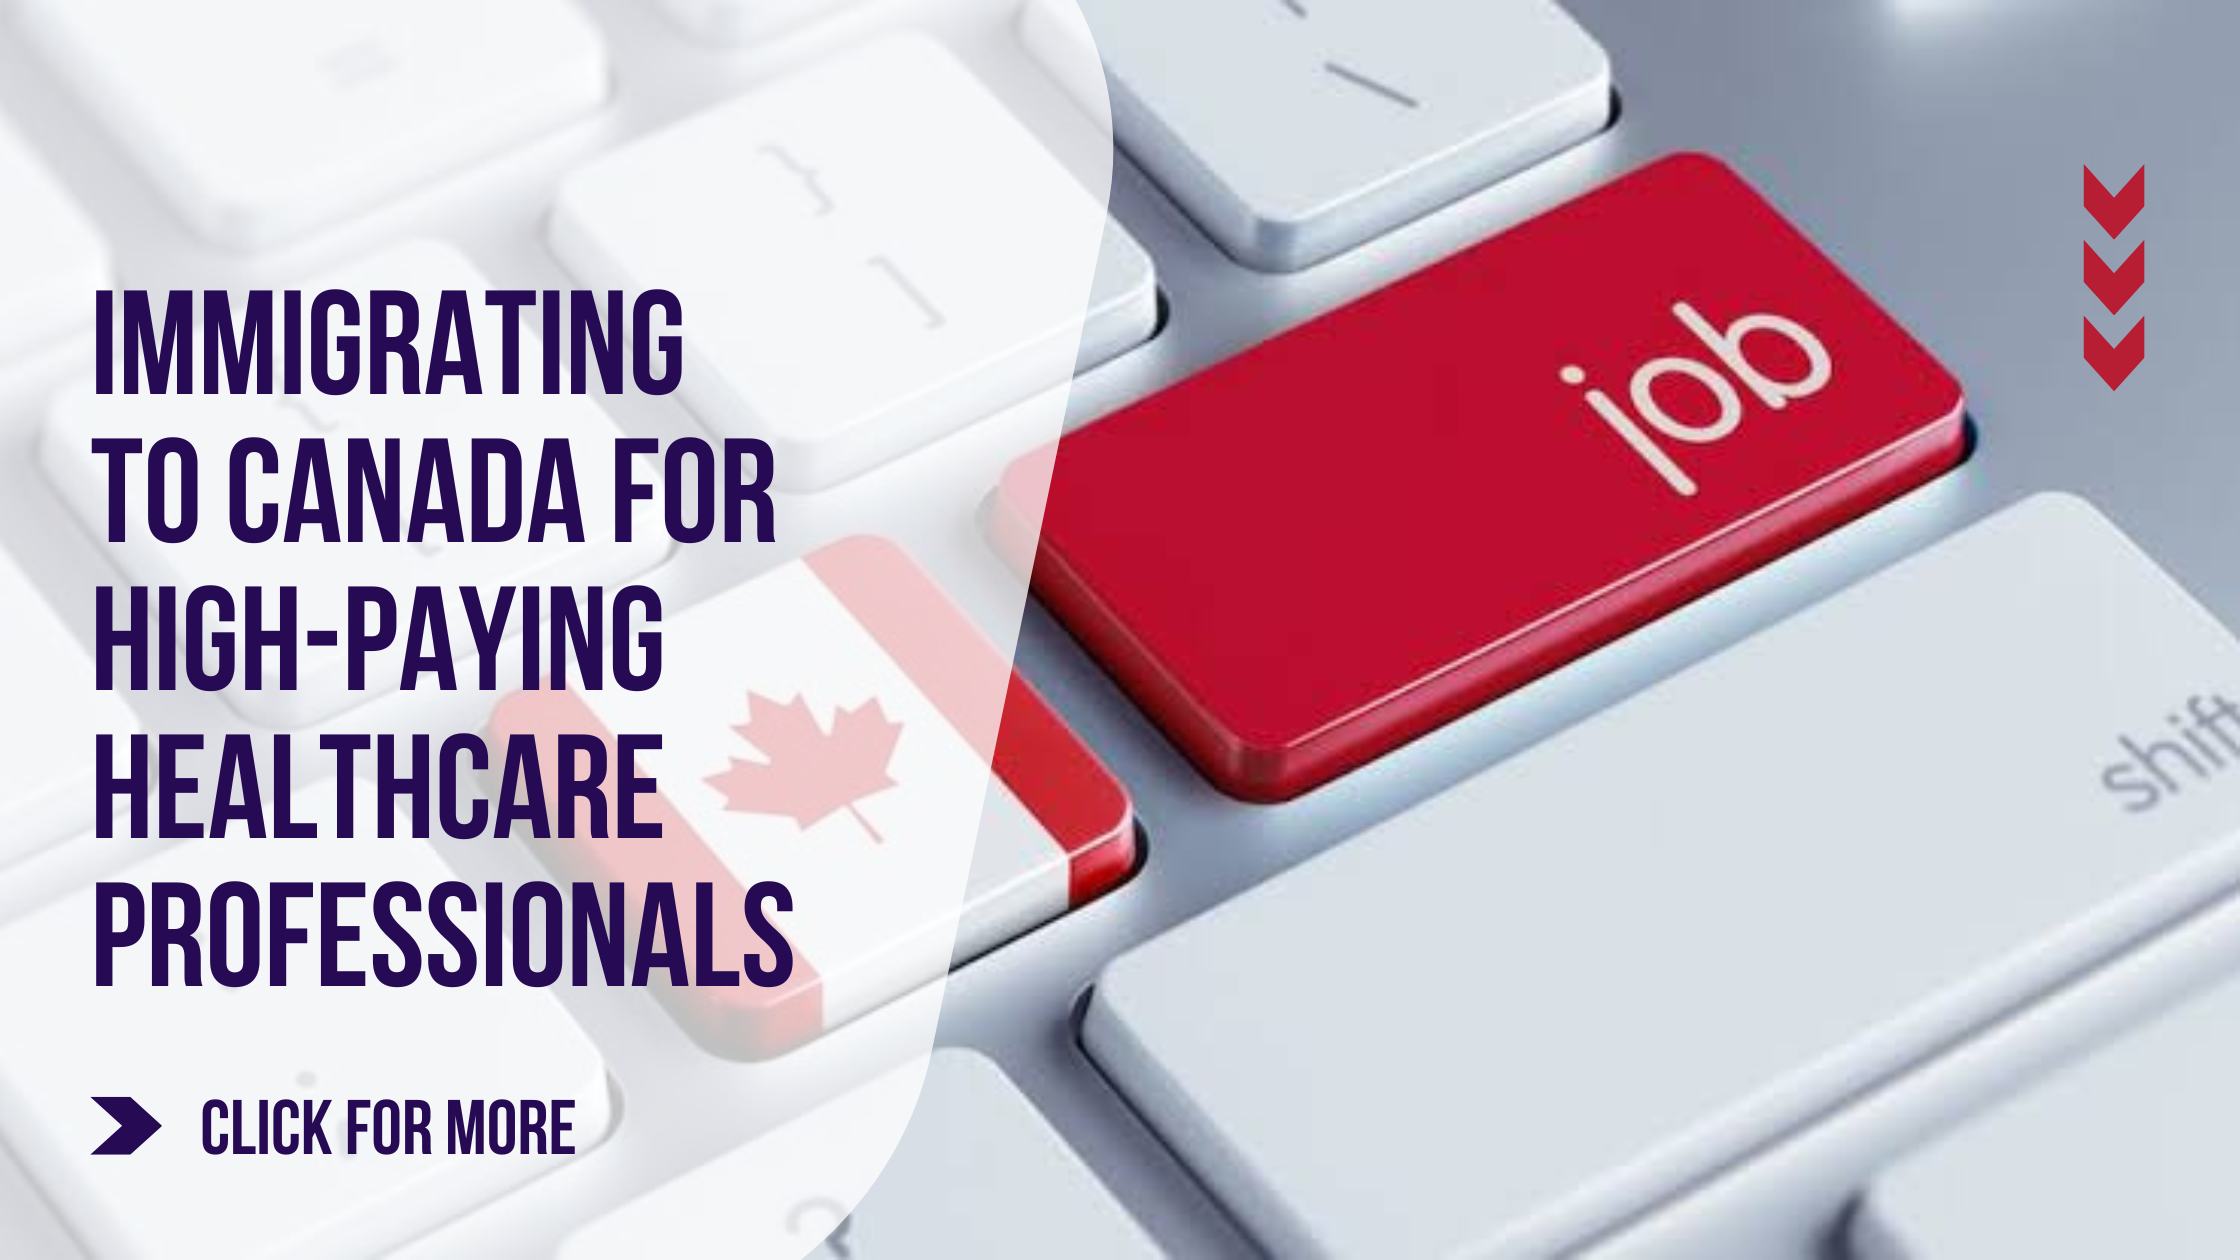 The Benefits of Immigrating to Canada for High-Paying Healthcare Professionals